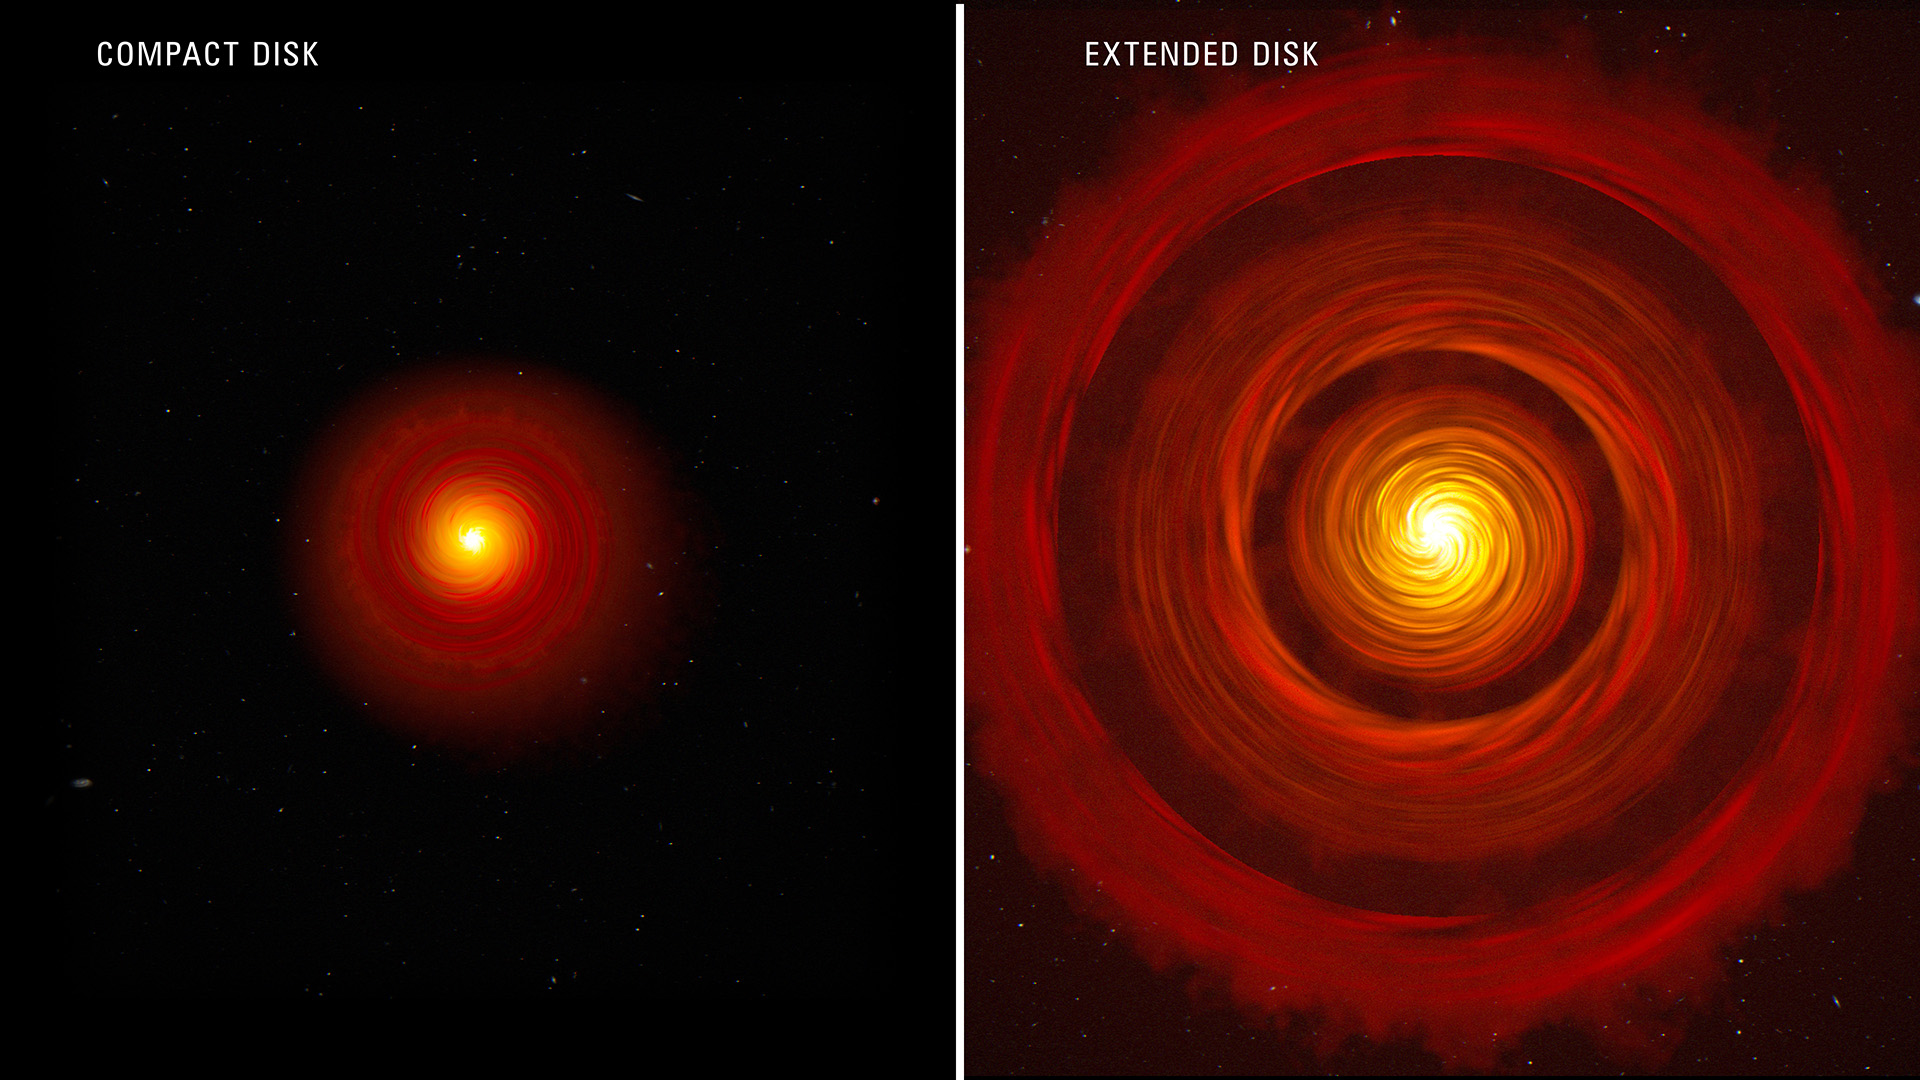 This artist’s concept compares two types of typical, planet-forming disks around newborn, Sun-like stars. On the left is a compact disk with no rings or gaps. On the right is an extended disk with rings and gaps. The compact disk is considerably smaller than the extended disk. Both the right and left illustrations have a bright yellow center indicative of a newly formed star. In both, the yellow center is surrounded by a swirling, orange disk. On the left, the compact disk appears unbroken by any gaps or rings. On the right, the extended disk features two, thick, mottled, orange rings surrounded by two, large, almost black gaps. The central portion of the extended disk has an outer region of orange surrounding a bright yellow center.